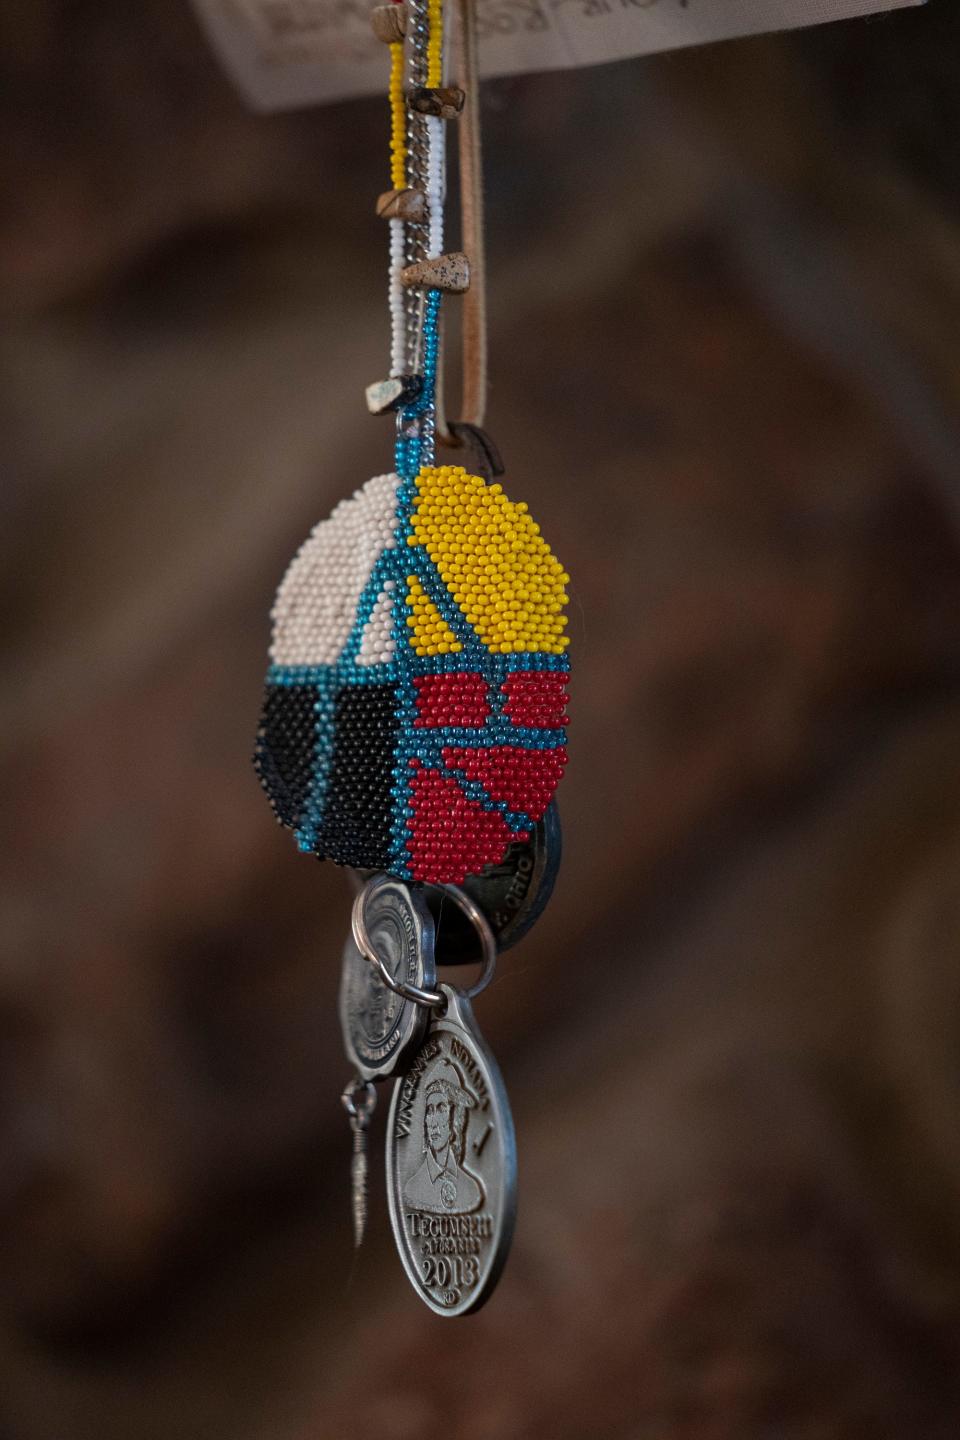 A beaded piece that represents the United Remnant Band of Shawnee Nation. Owned by Dark Rain Thom, who says she's a Shawnee descendant and who tried to gain federal tribal recognition for the group, which is based in Ohio. The tribe is unrecognized federally but successfully sought some validation from the state legislature in Ohio.